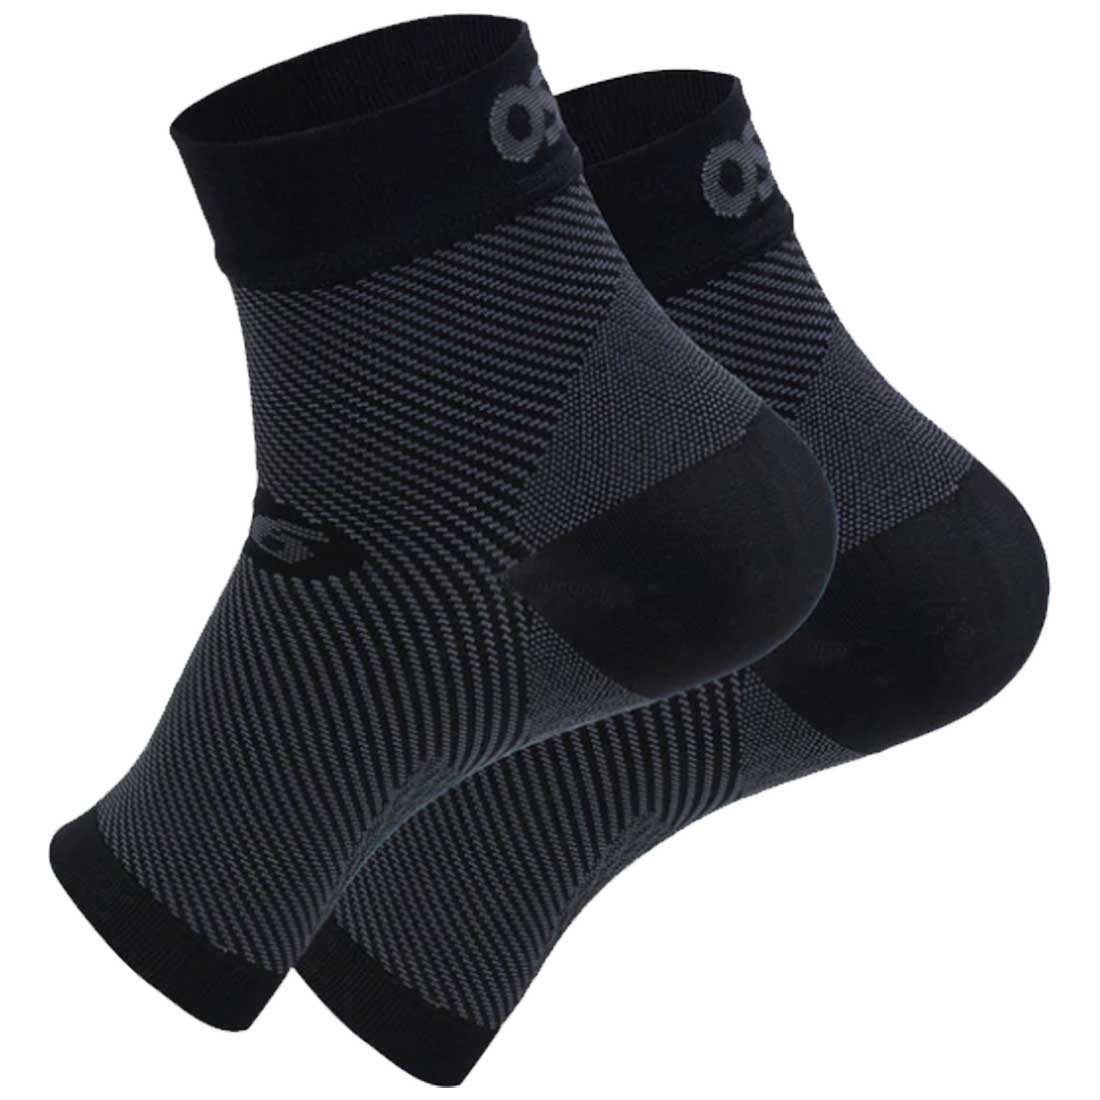 OS1st FS6 Performance Foot Sleeve Pair